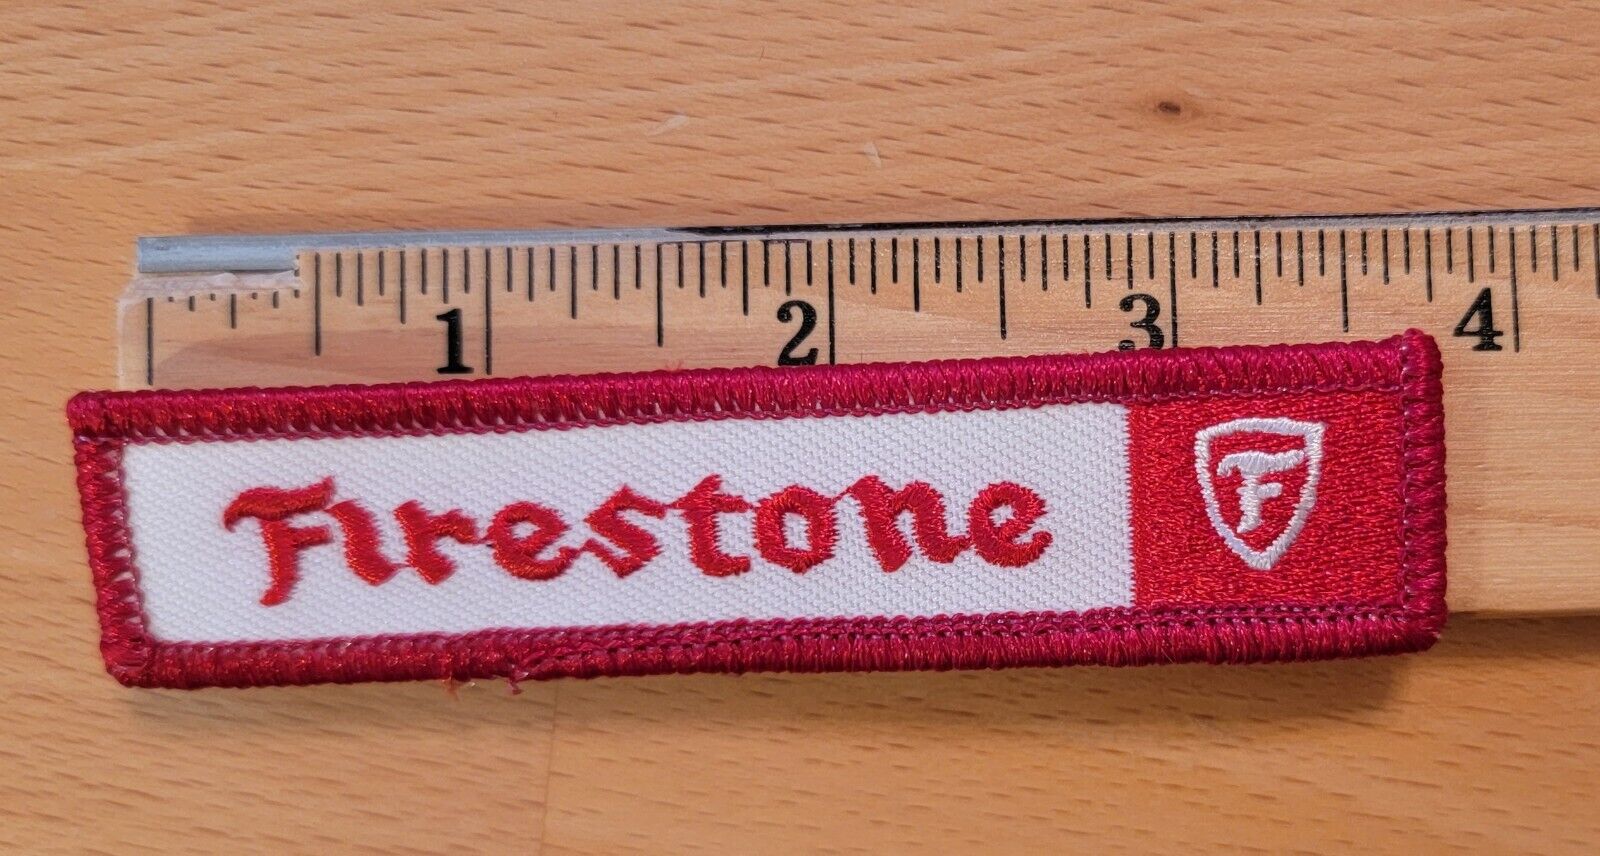 VTG FIRESTONE TIRES Embroidered Patch Iron/Sew On Automotive Auto Mechanic